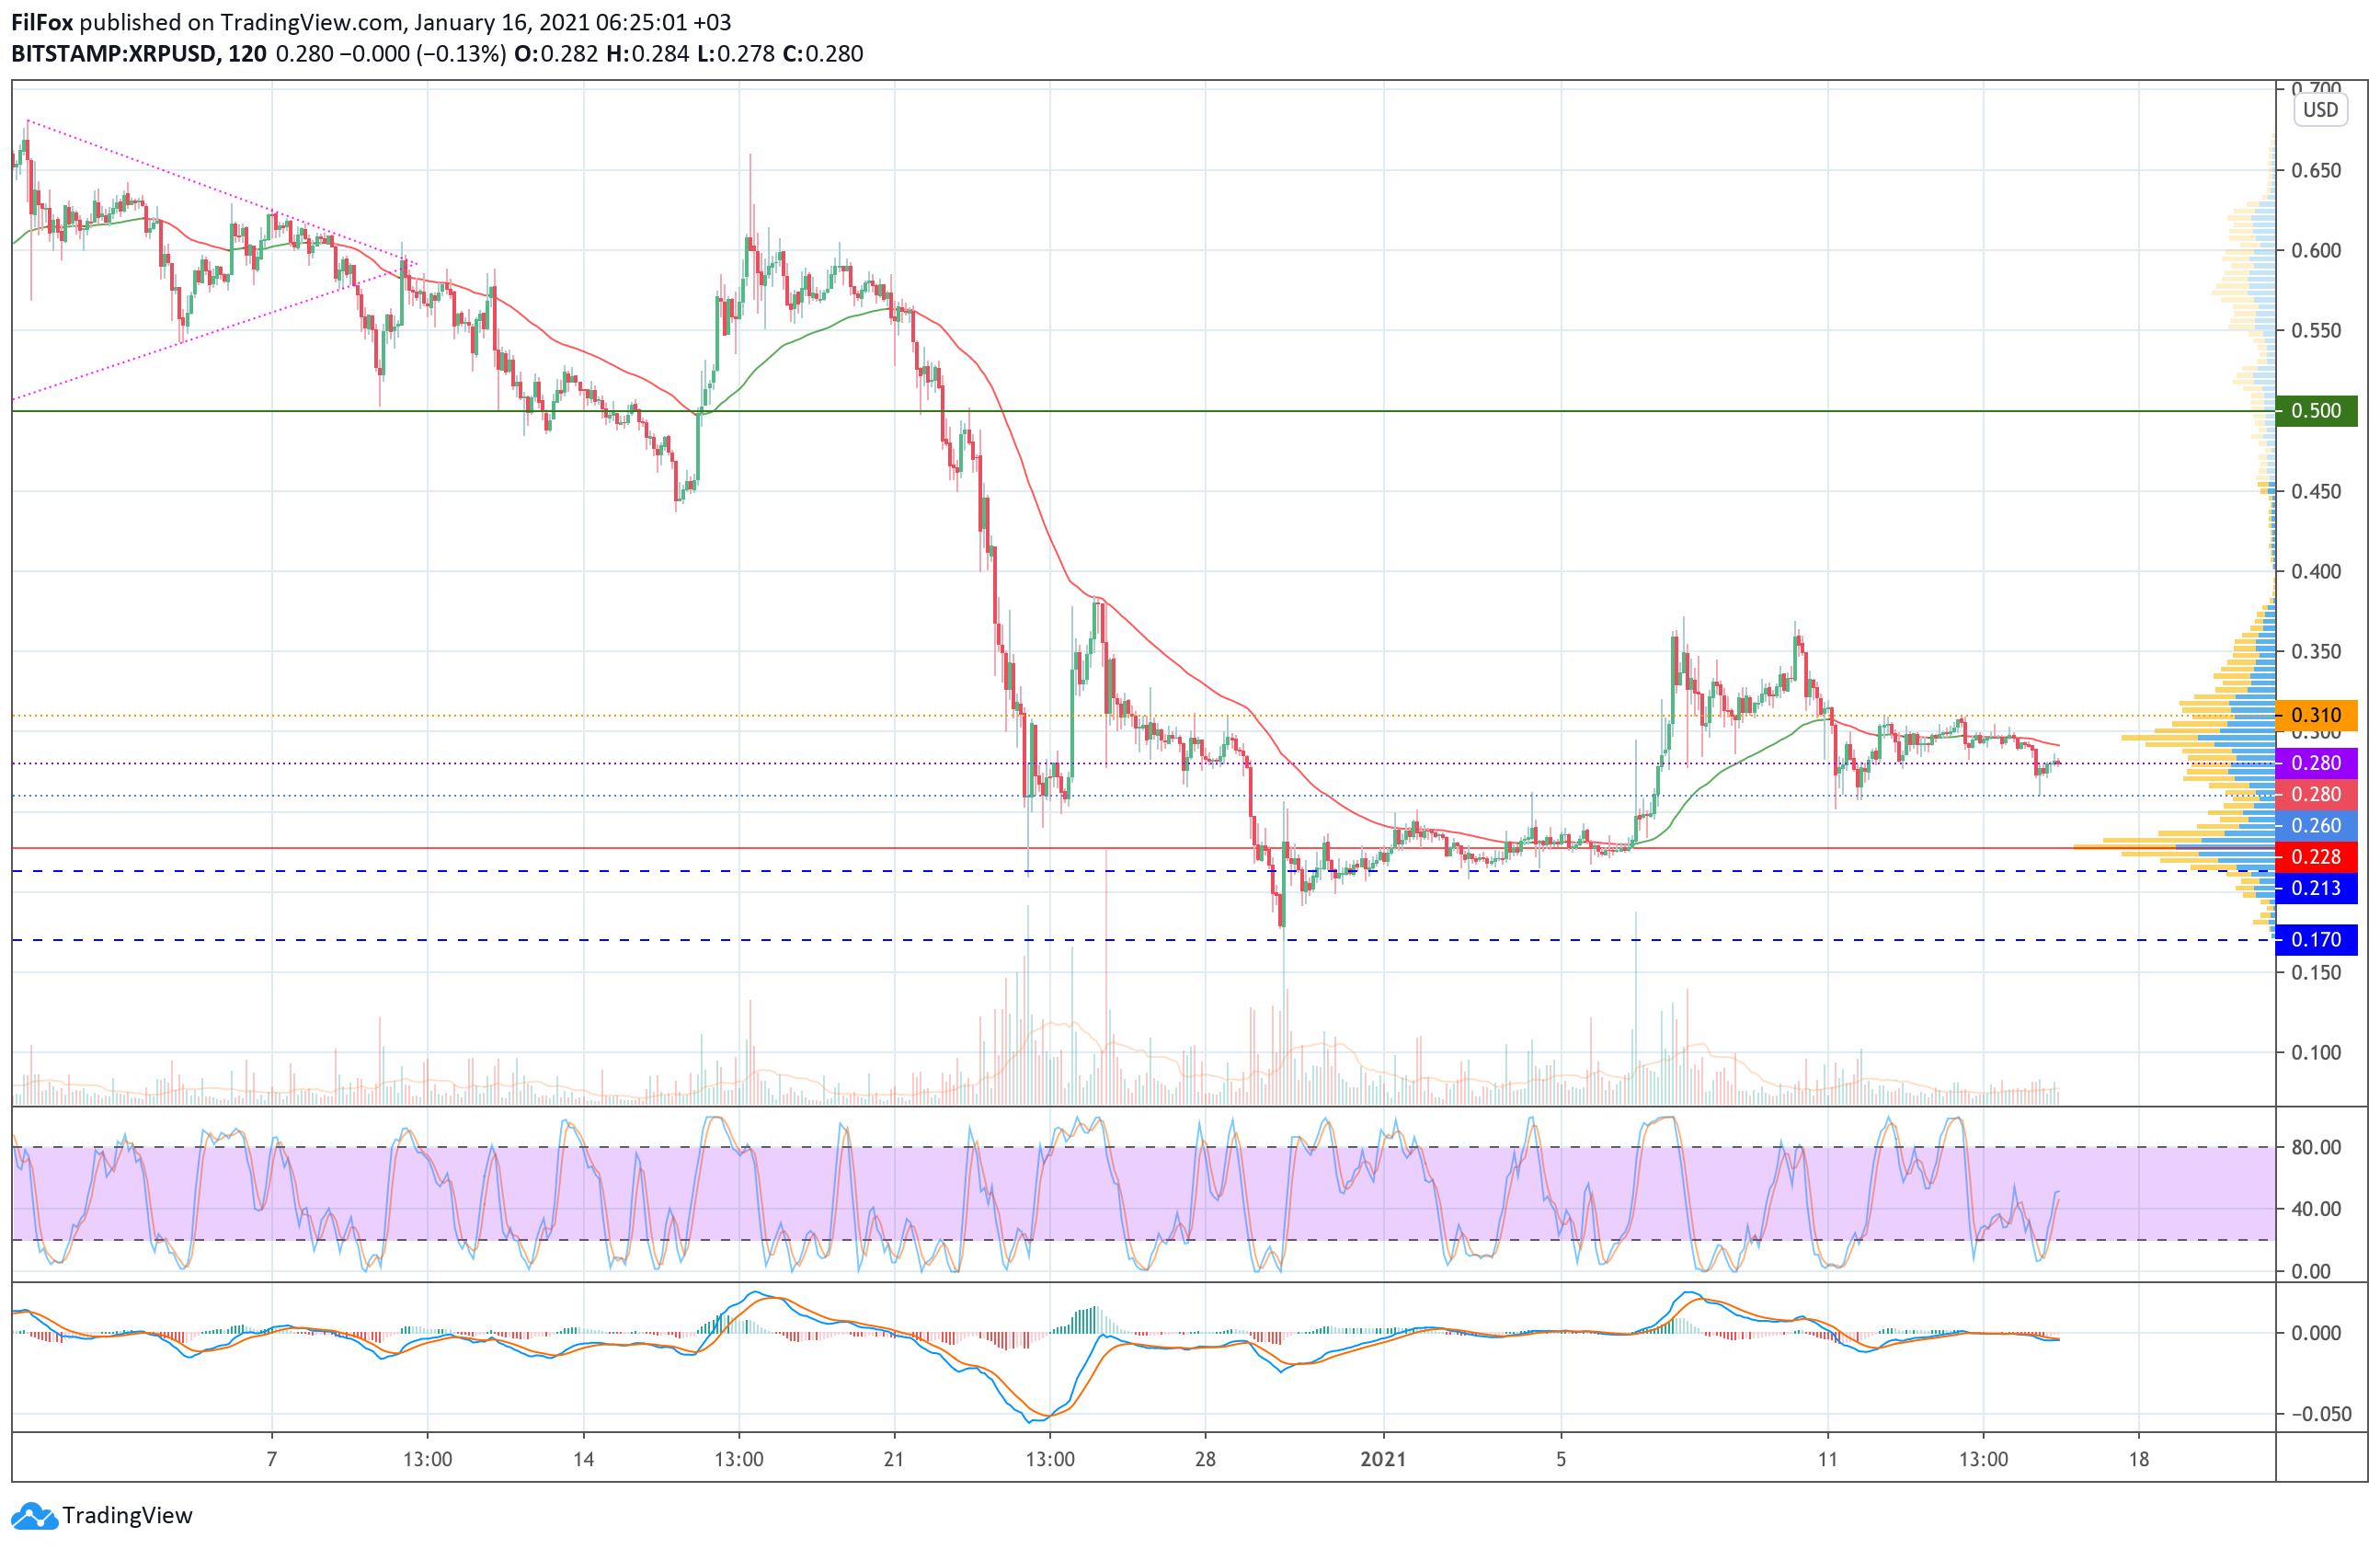 Analysis of prices for Bitcoin, Ethereum, Ripple for 01/16/2021